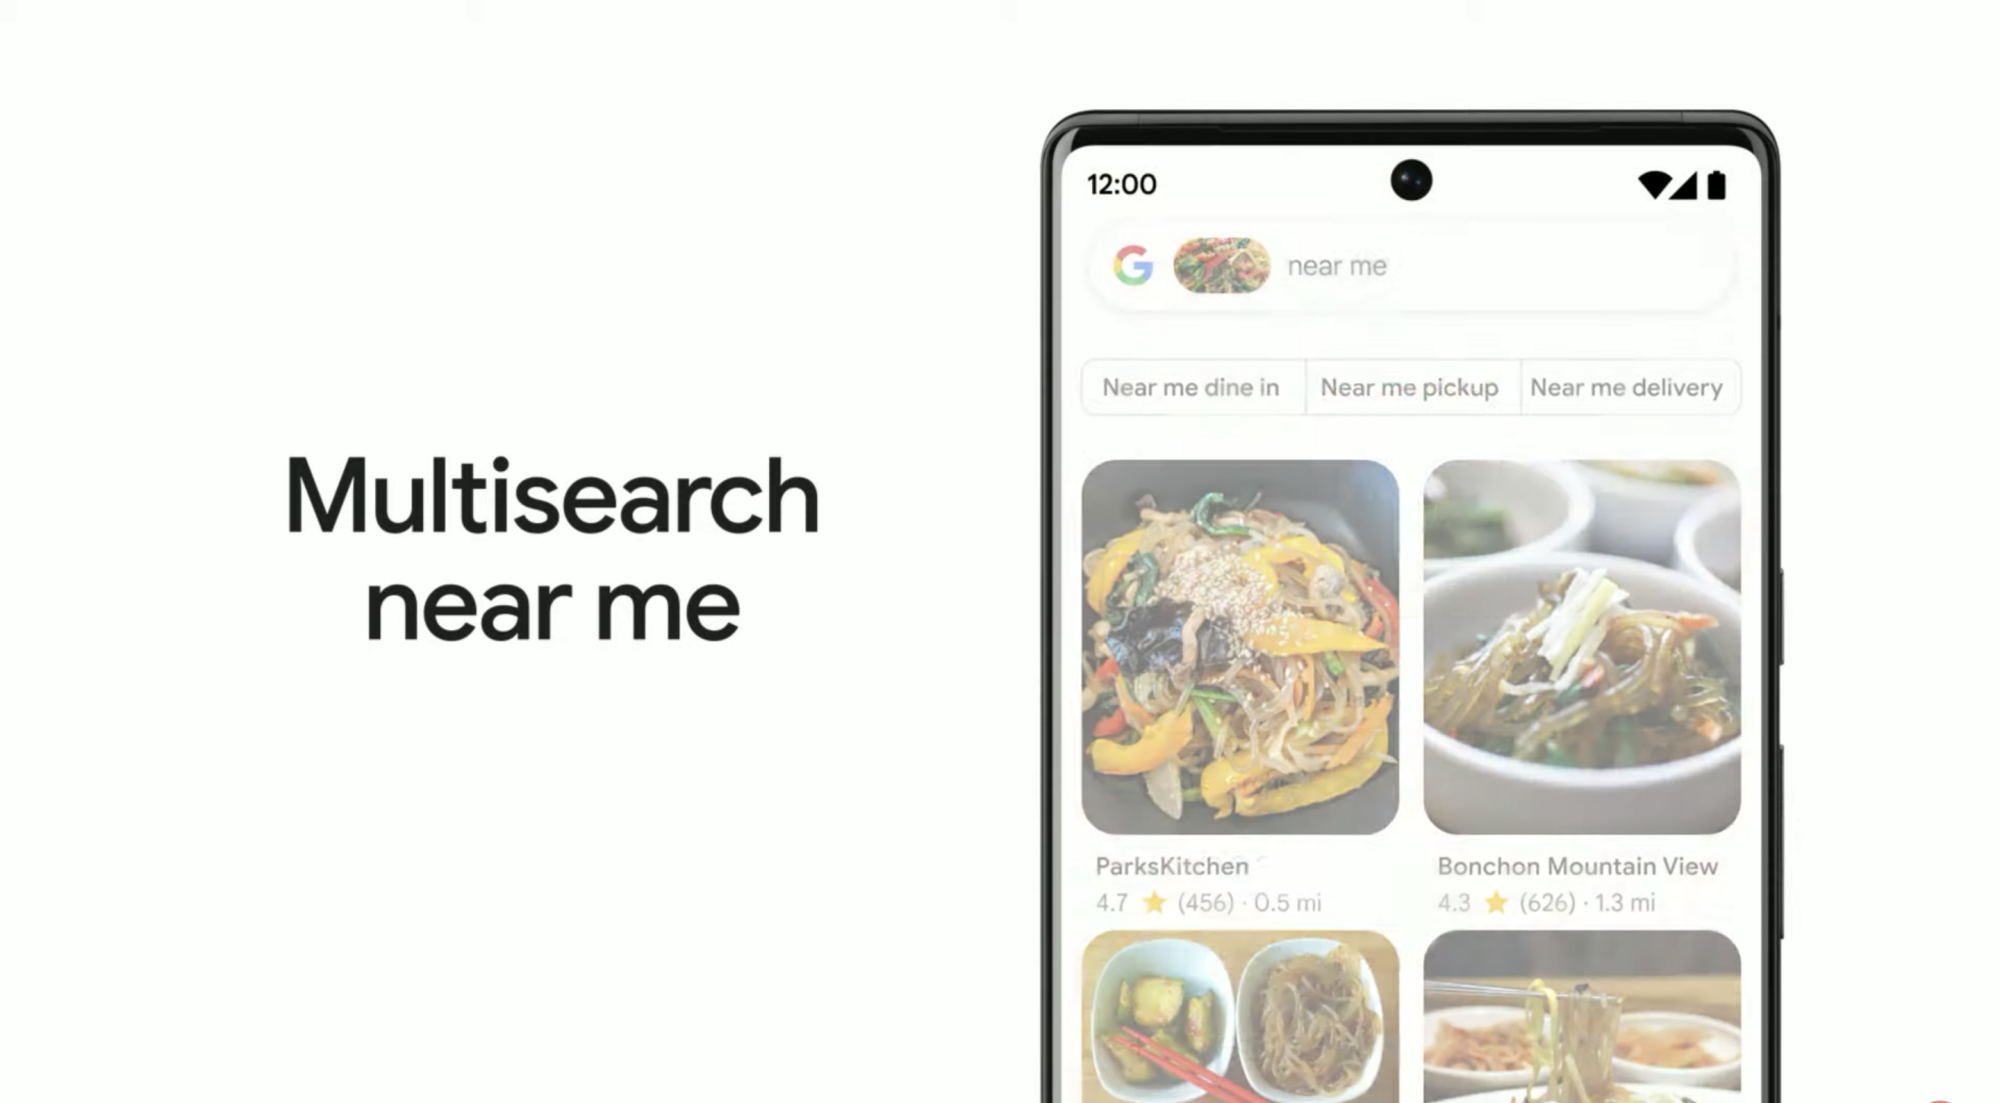 Google's updated nearby visual search feature